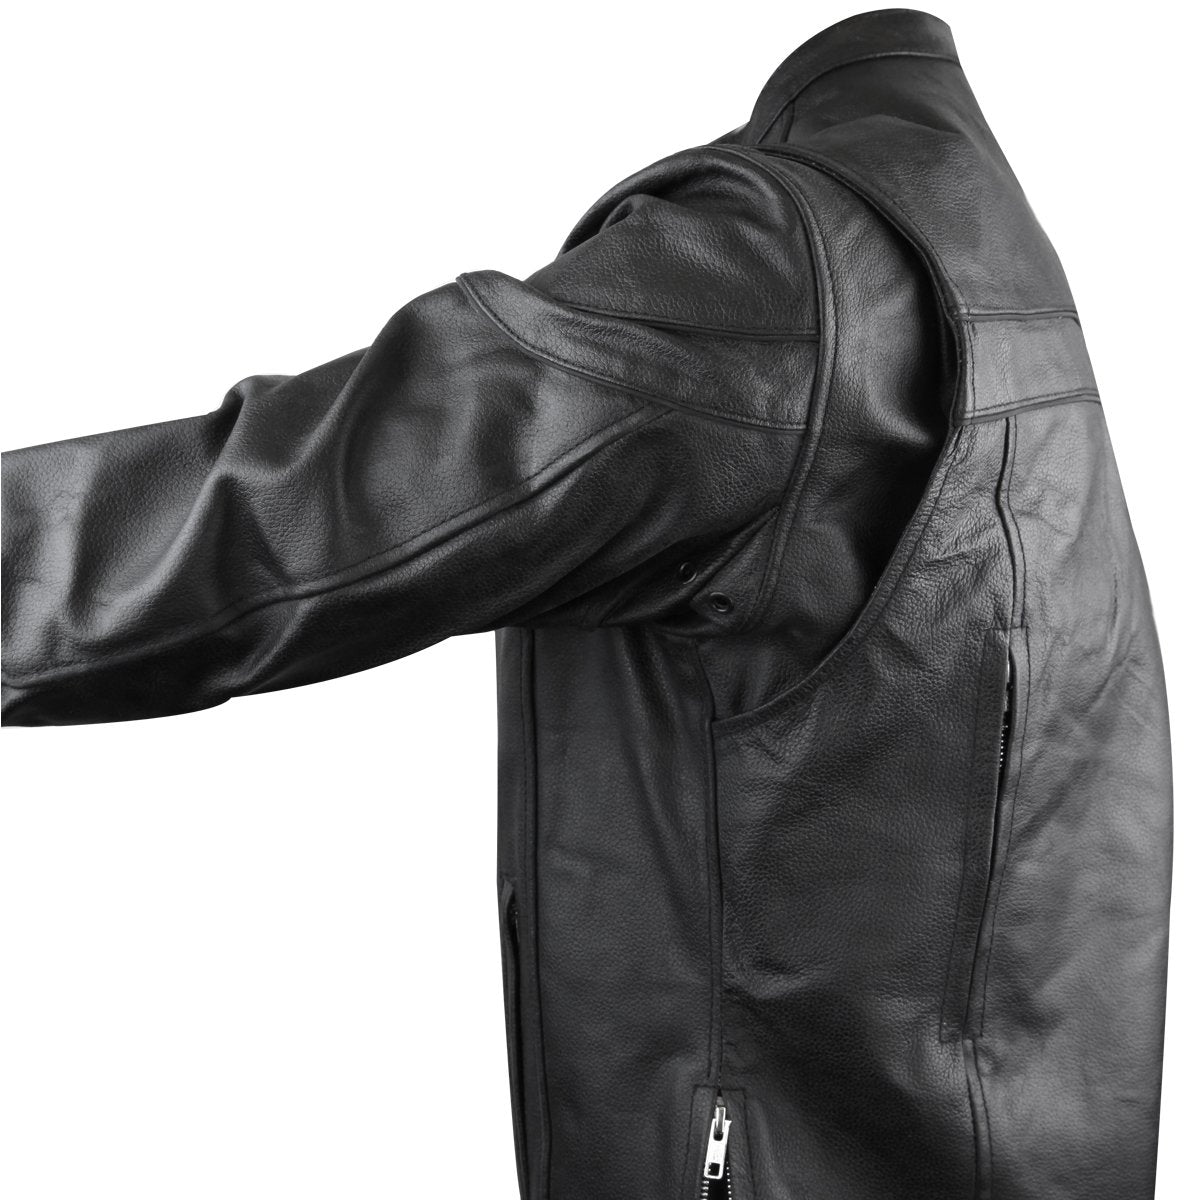 Vance Leather Men's Racer Jacket with Zippered Vents